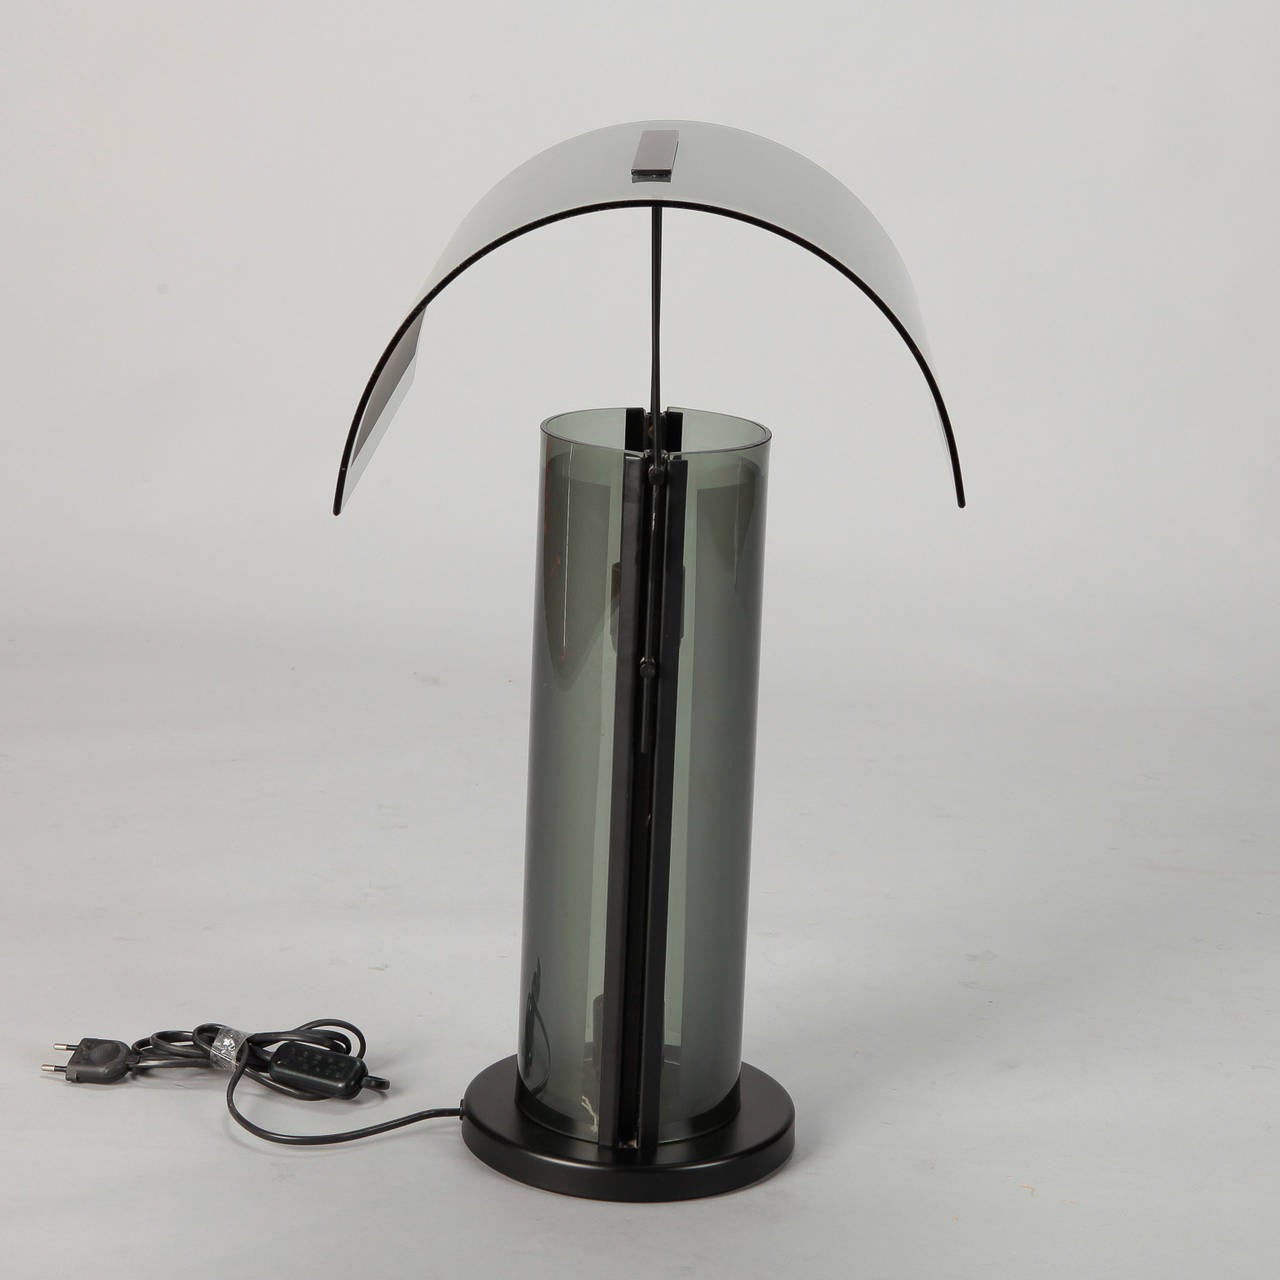 Circa 1960s / 1970s all glass table lamp in a smoky gray shade with cylindrical base and curved shade. Wiring has been updated for US electrical standards.